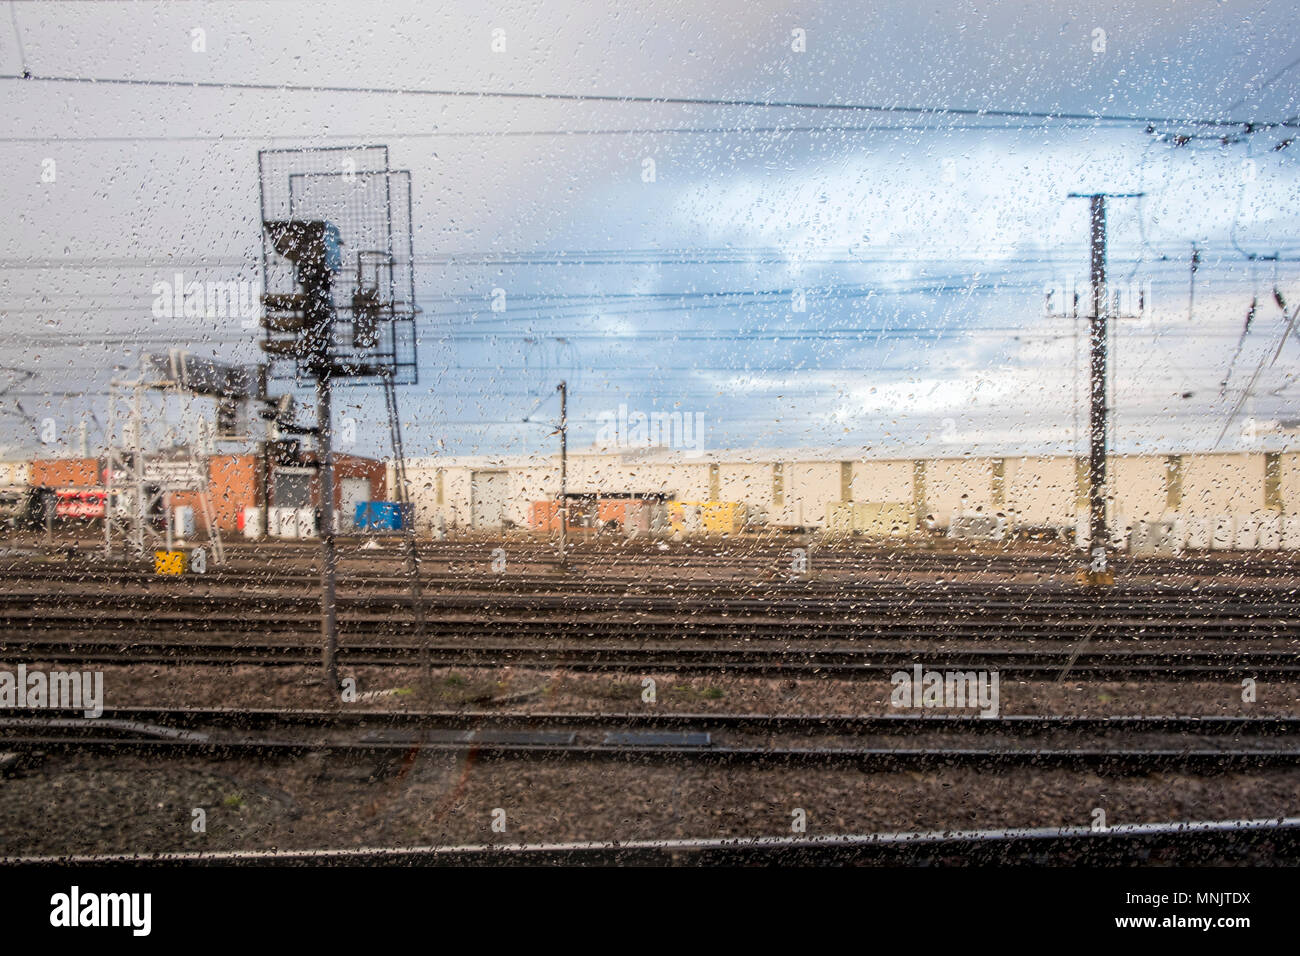 Wet weather. Looking out through a train window with rain drops on the glass at railway tracks on a rainy day, Doncaster, England, UK Stock Photo